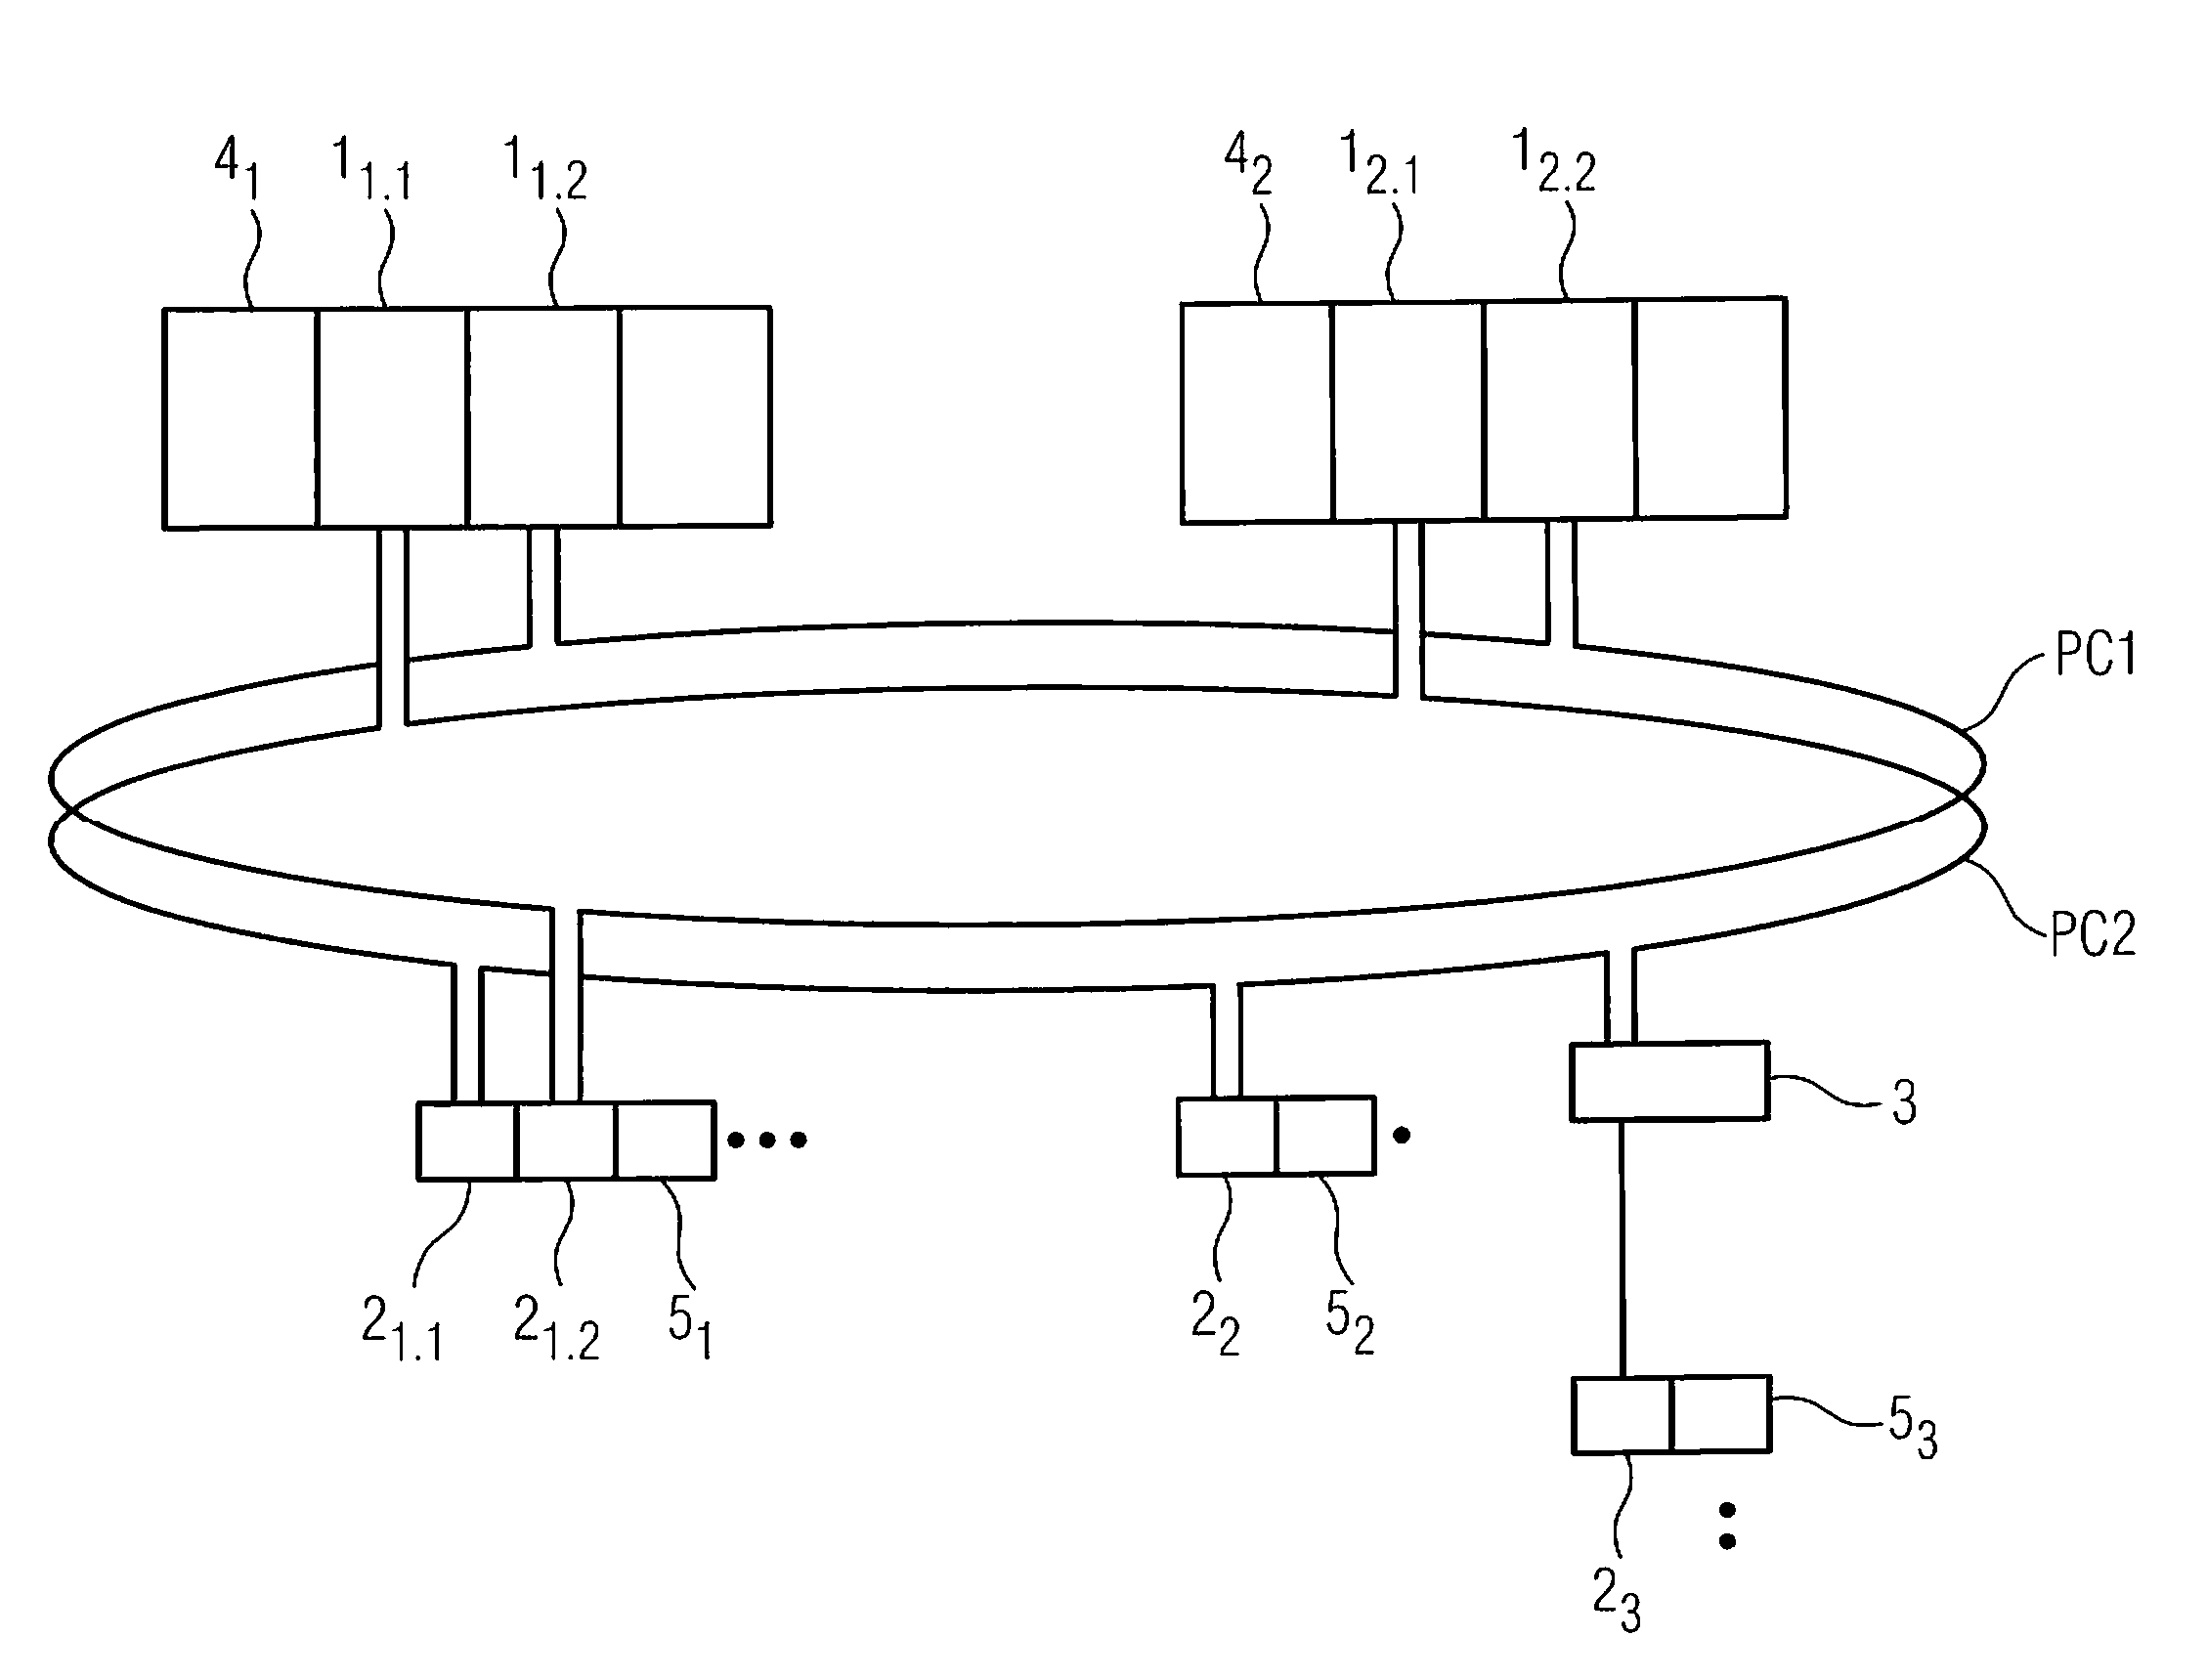 High-availability communication system